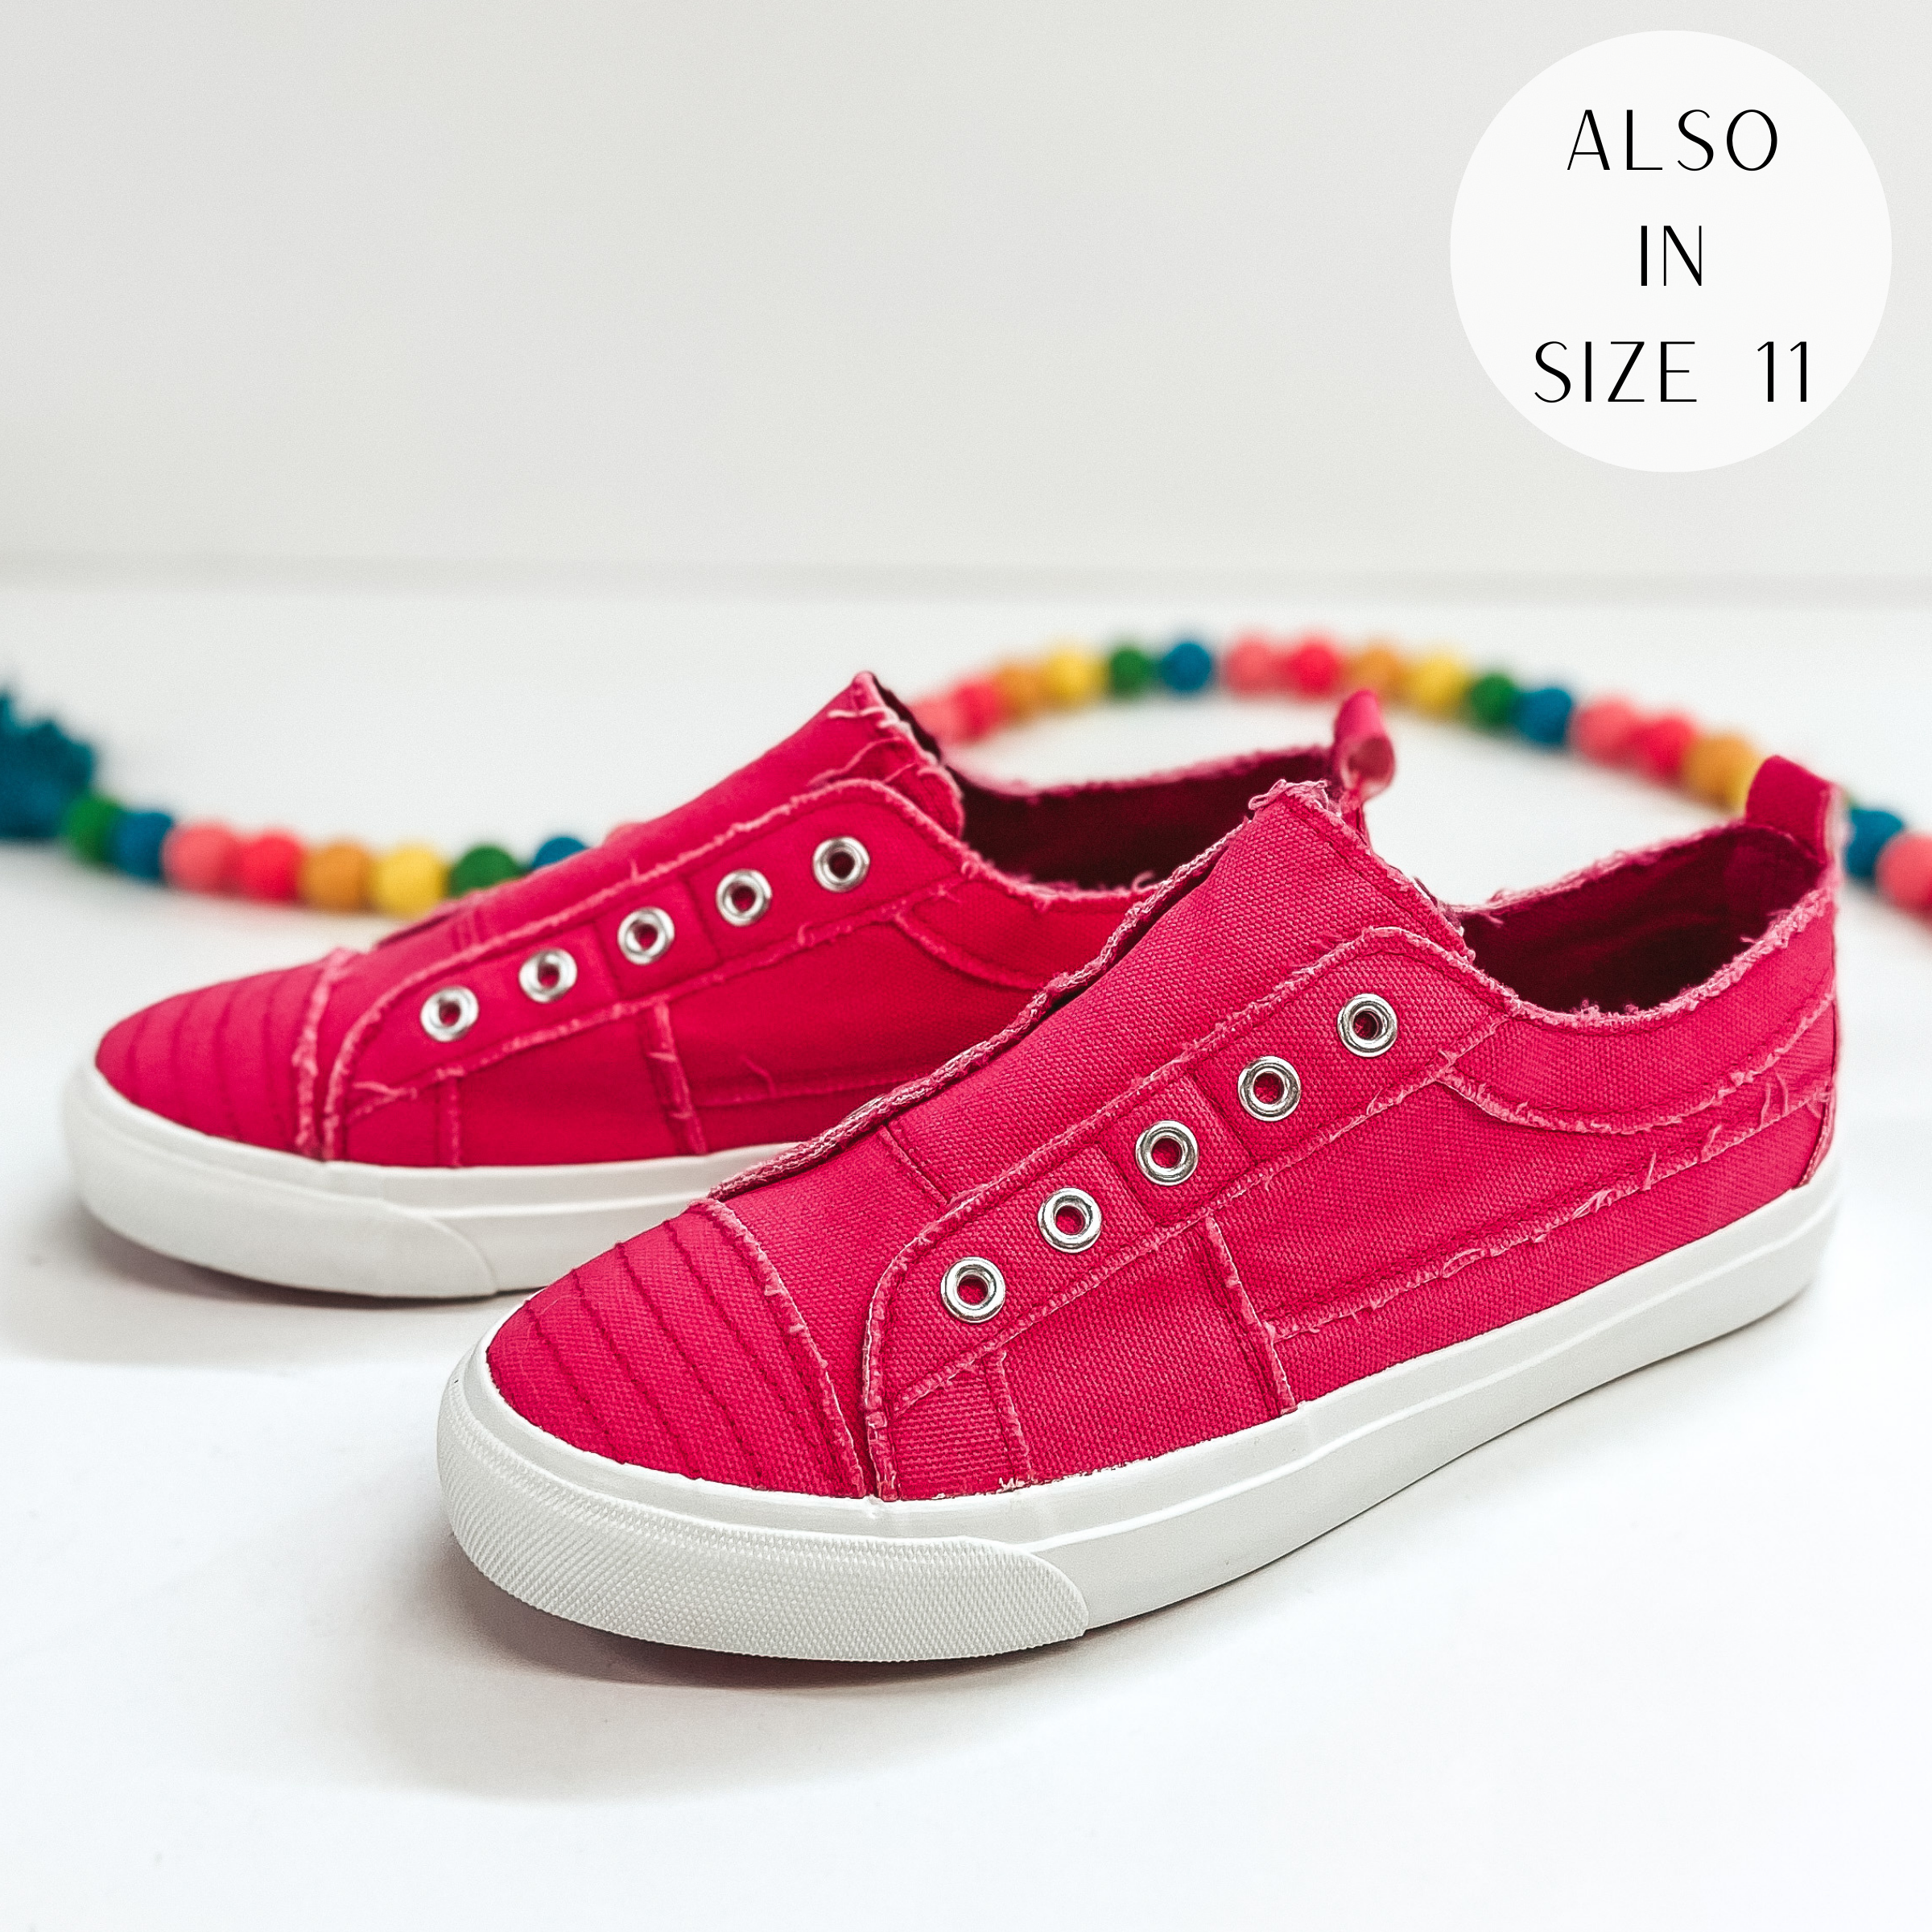 A pair of hot pink sneakers that do not have laces. Pictured on white background with colorful beads.